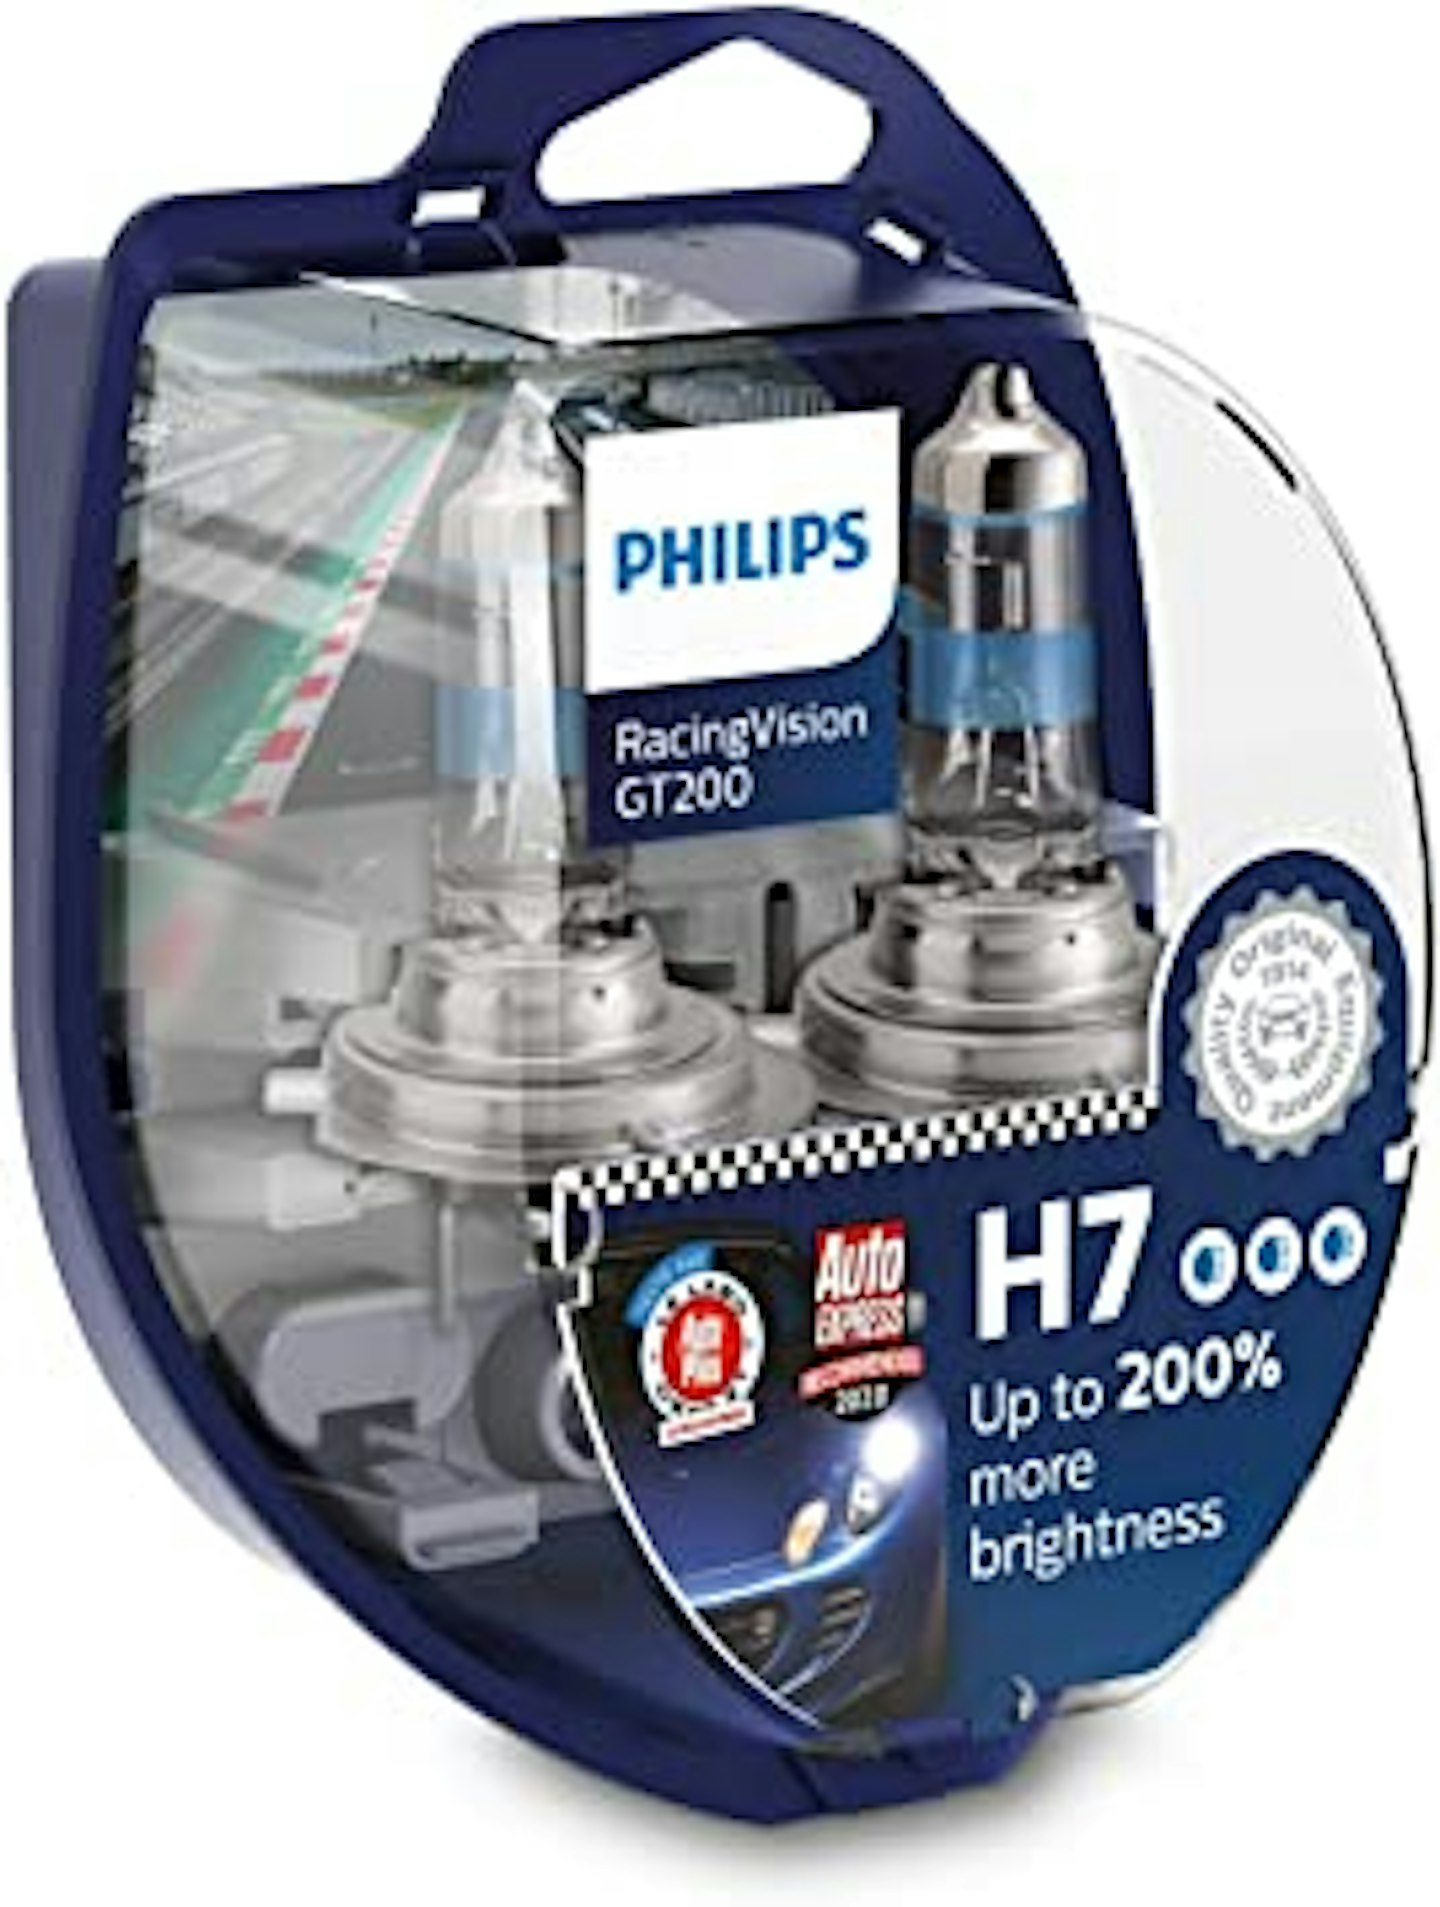 Philips 577928 RacingVision GT200 H7